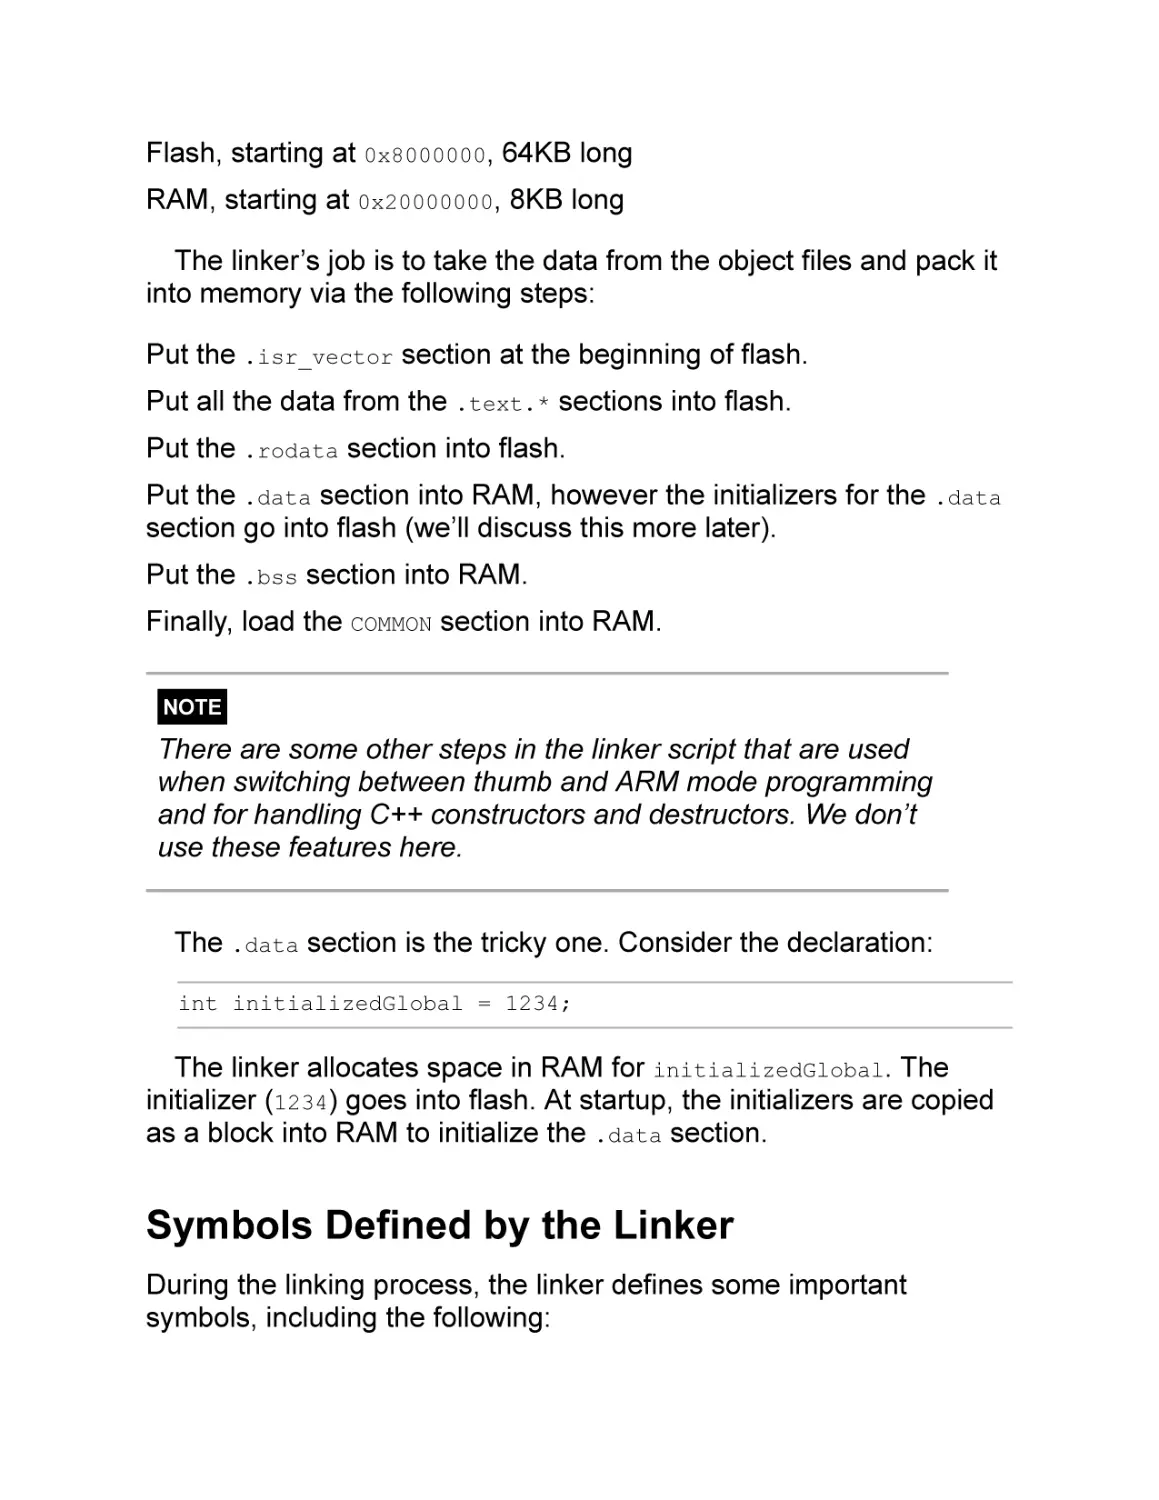 Symbols Defined by the Linker